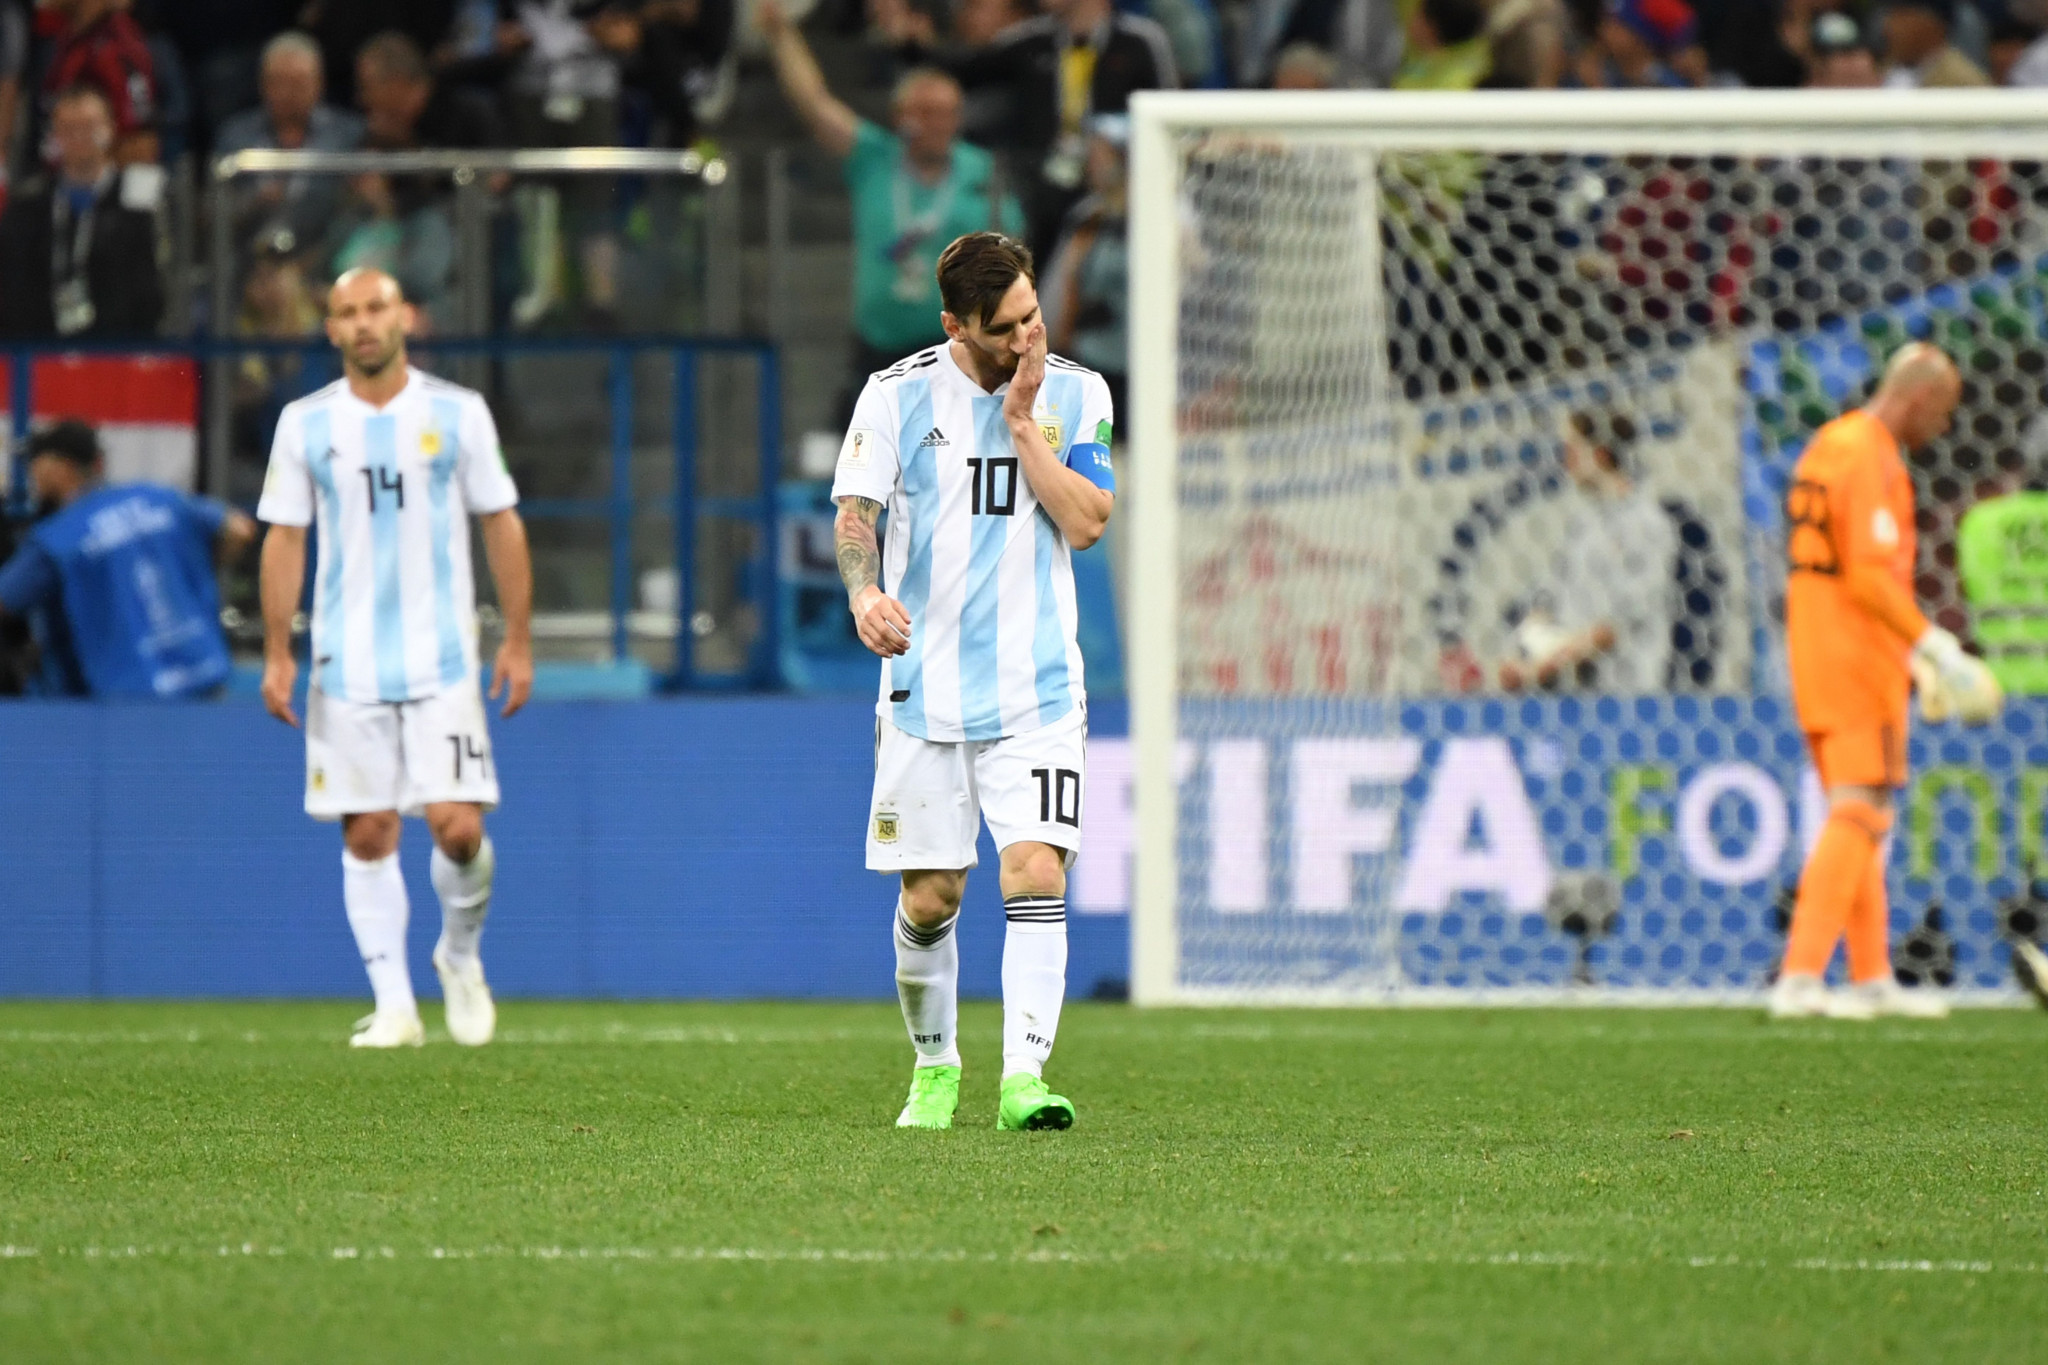 Star man Lionel Messi was helpless as Argentina lost 3-0 to Croatia today to leave them on the brink of elimination from the 2018 FIFA World Cup in Russia ©Getty Images